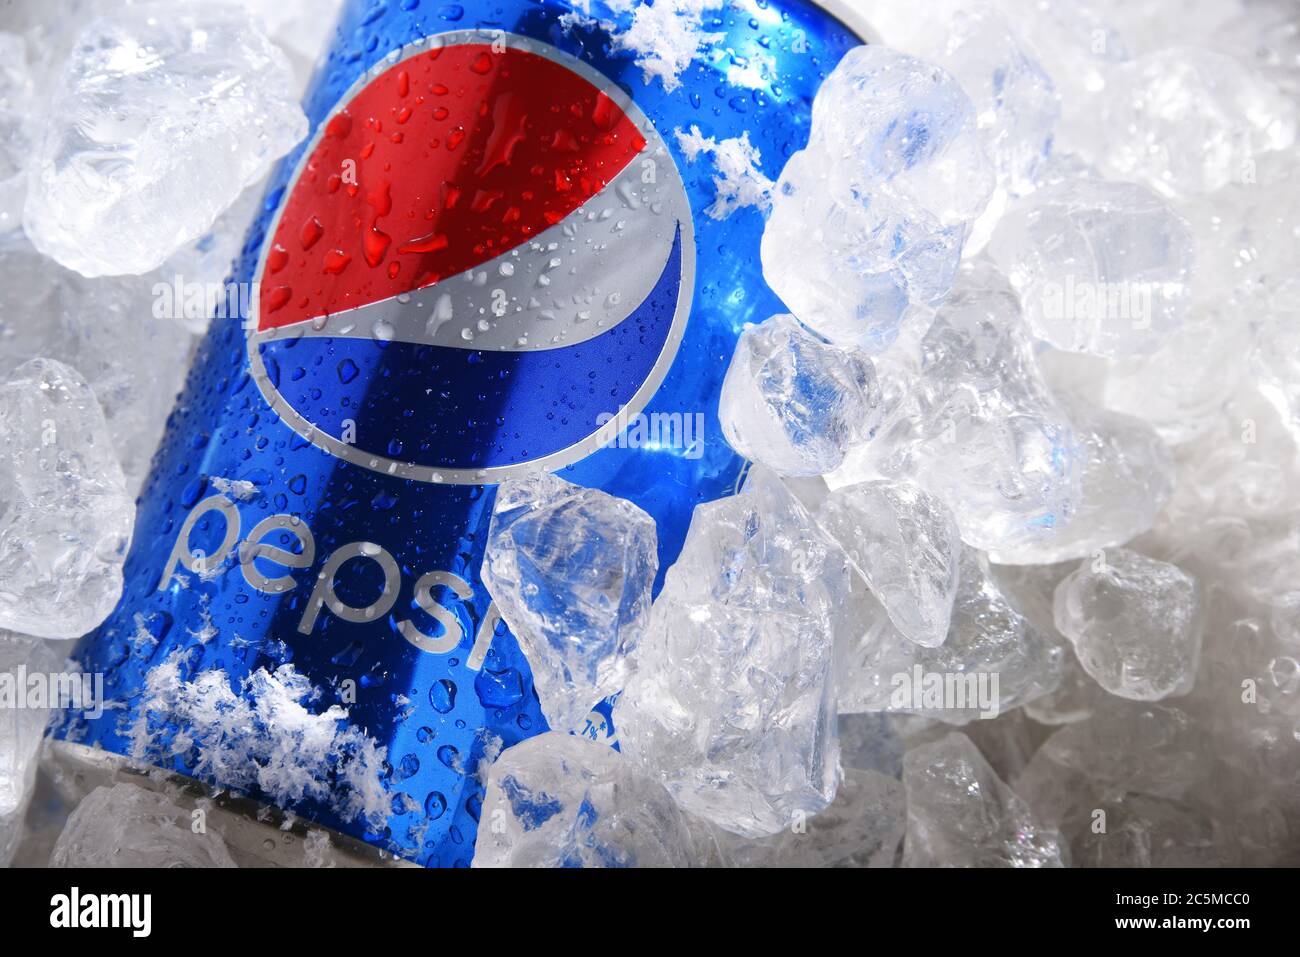 POZNAN, POL - MAY 22, 2020: Can of Pepsi, a carbonated soft drink produced and manufactured by PepsiCo. The beverage was created and developed in 1893 Stock Photo